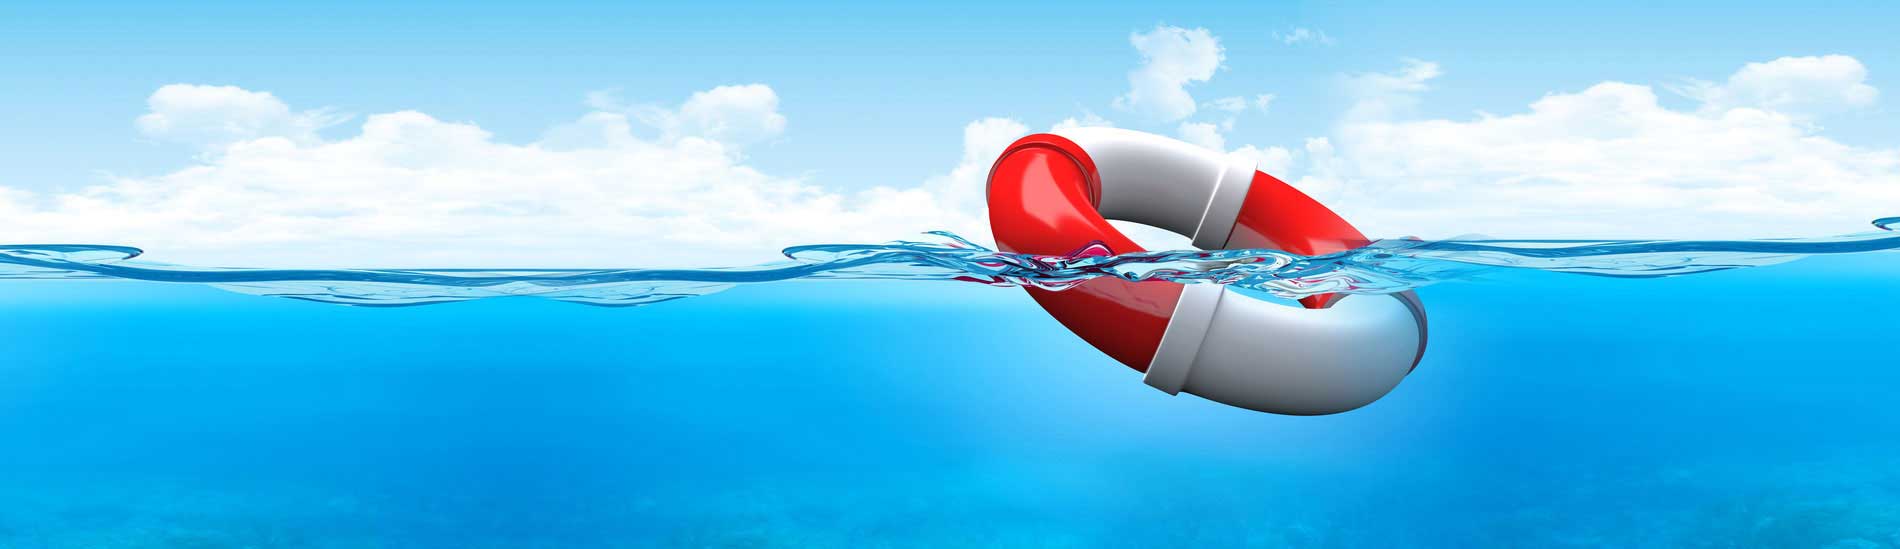 We're your lifesavers in the salty sea of insurance!